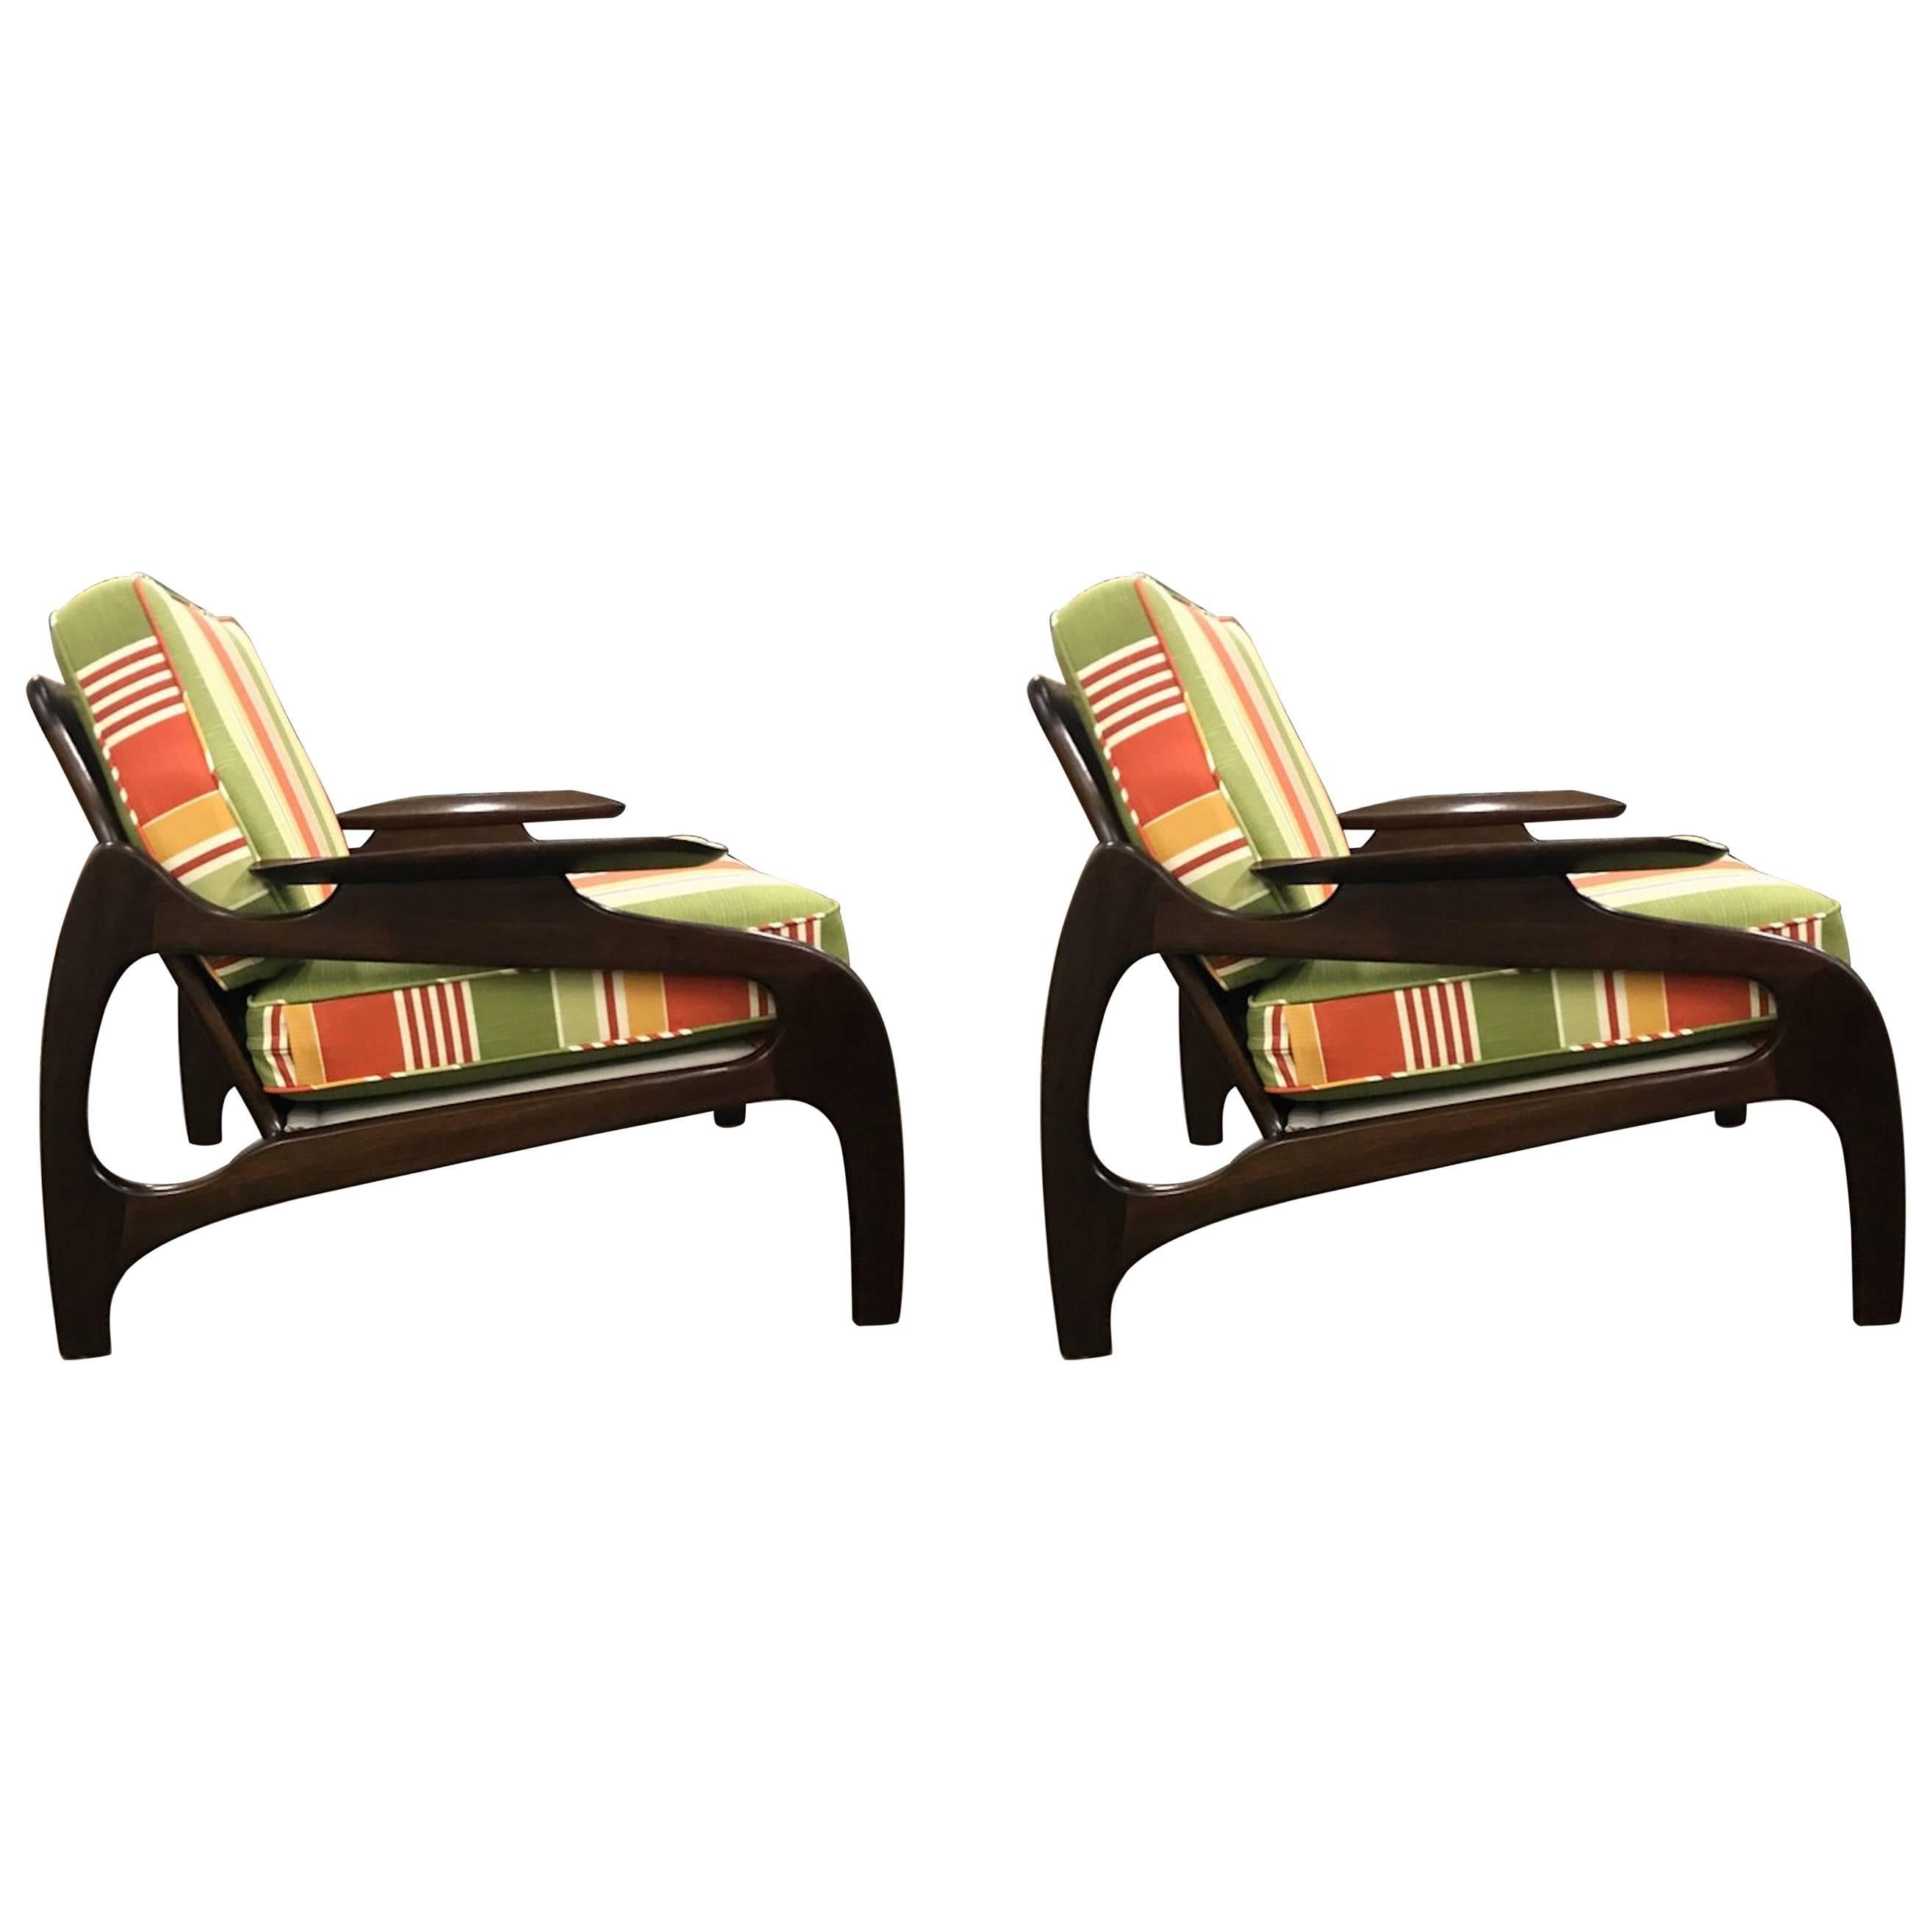 Pair of Lounge Chairs, Model 1209C, by Adrian Pearsall for Craft Associates